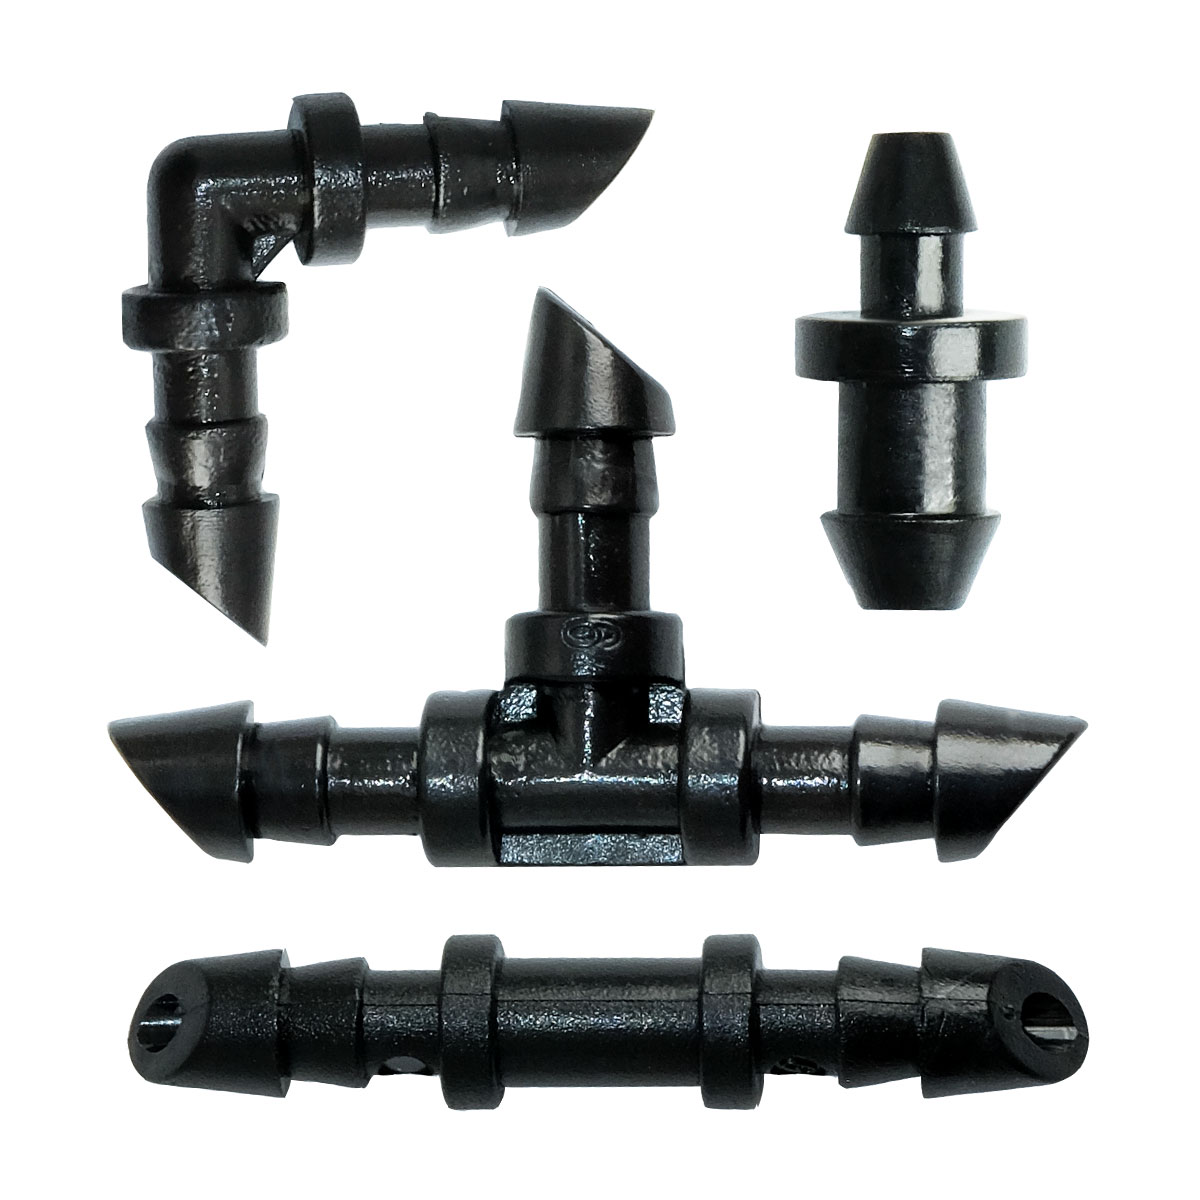 UCINNOVATE Irrigation Fittings Kit, Pipe Hose Barbed Connectors for 1/4"" Tubing 130 Pcs Set